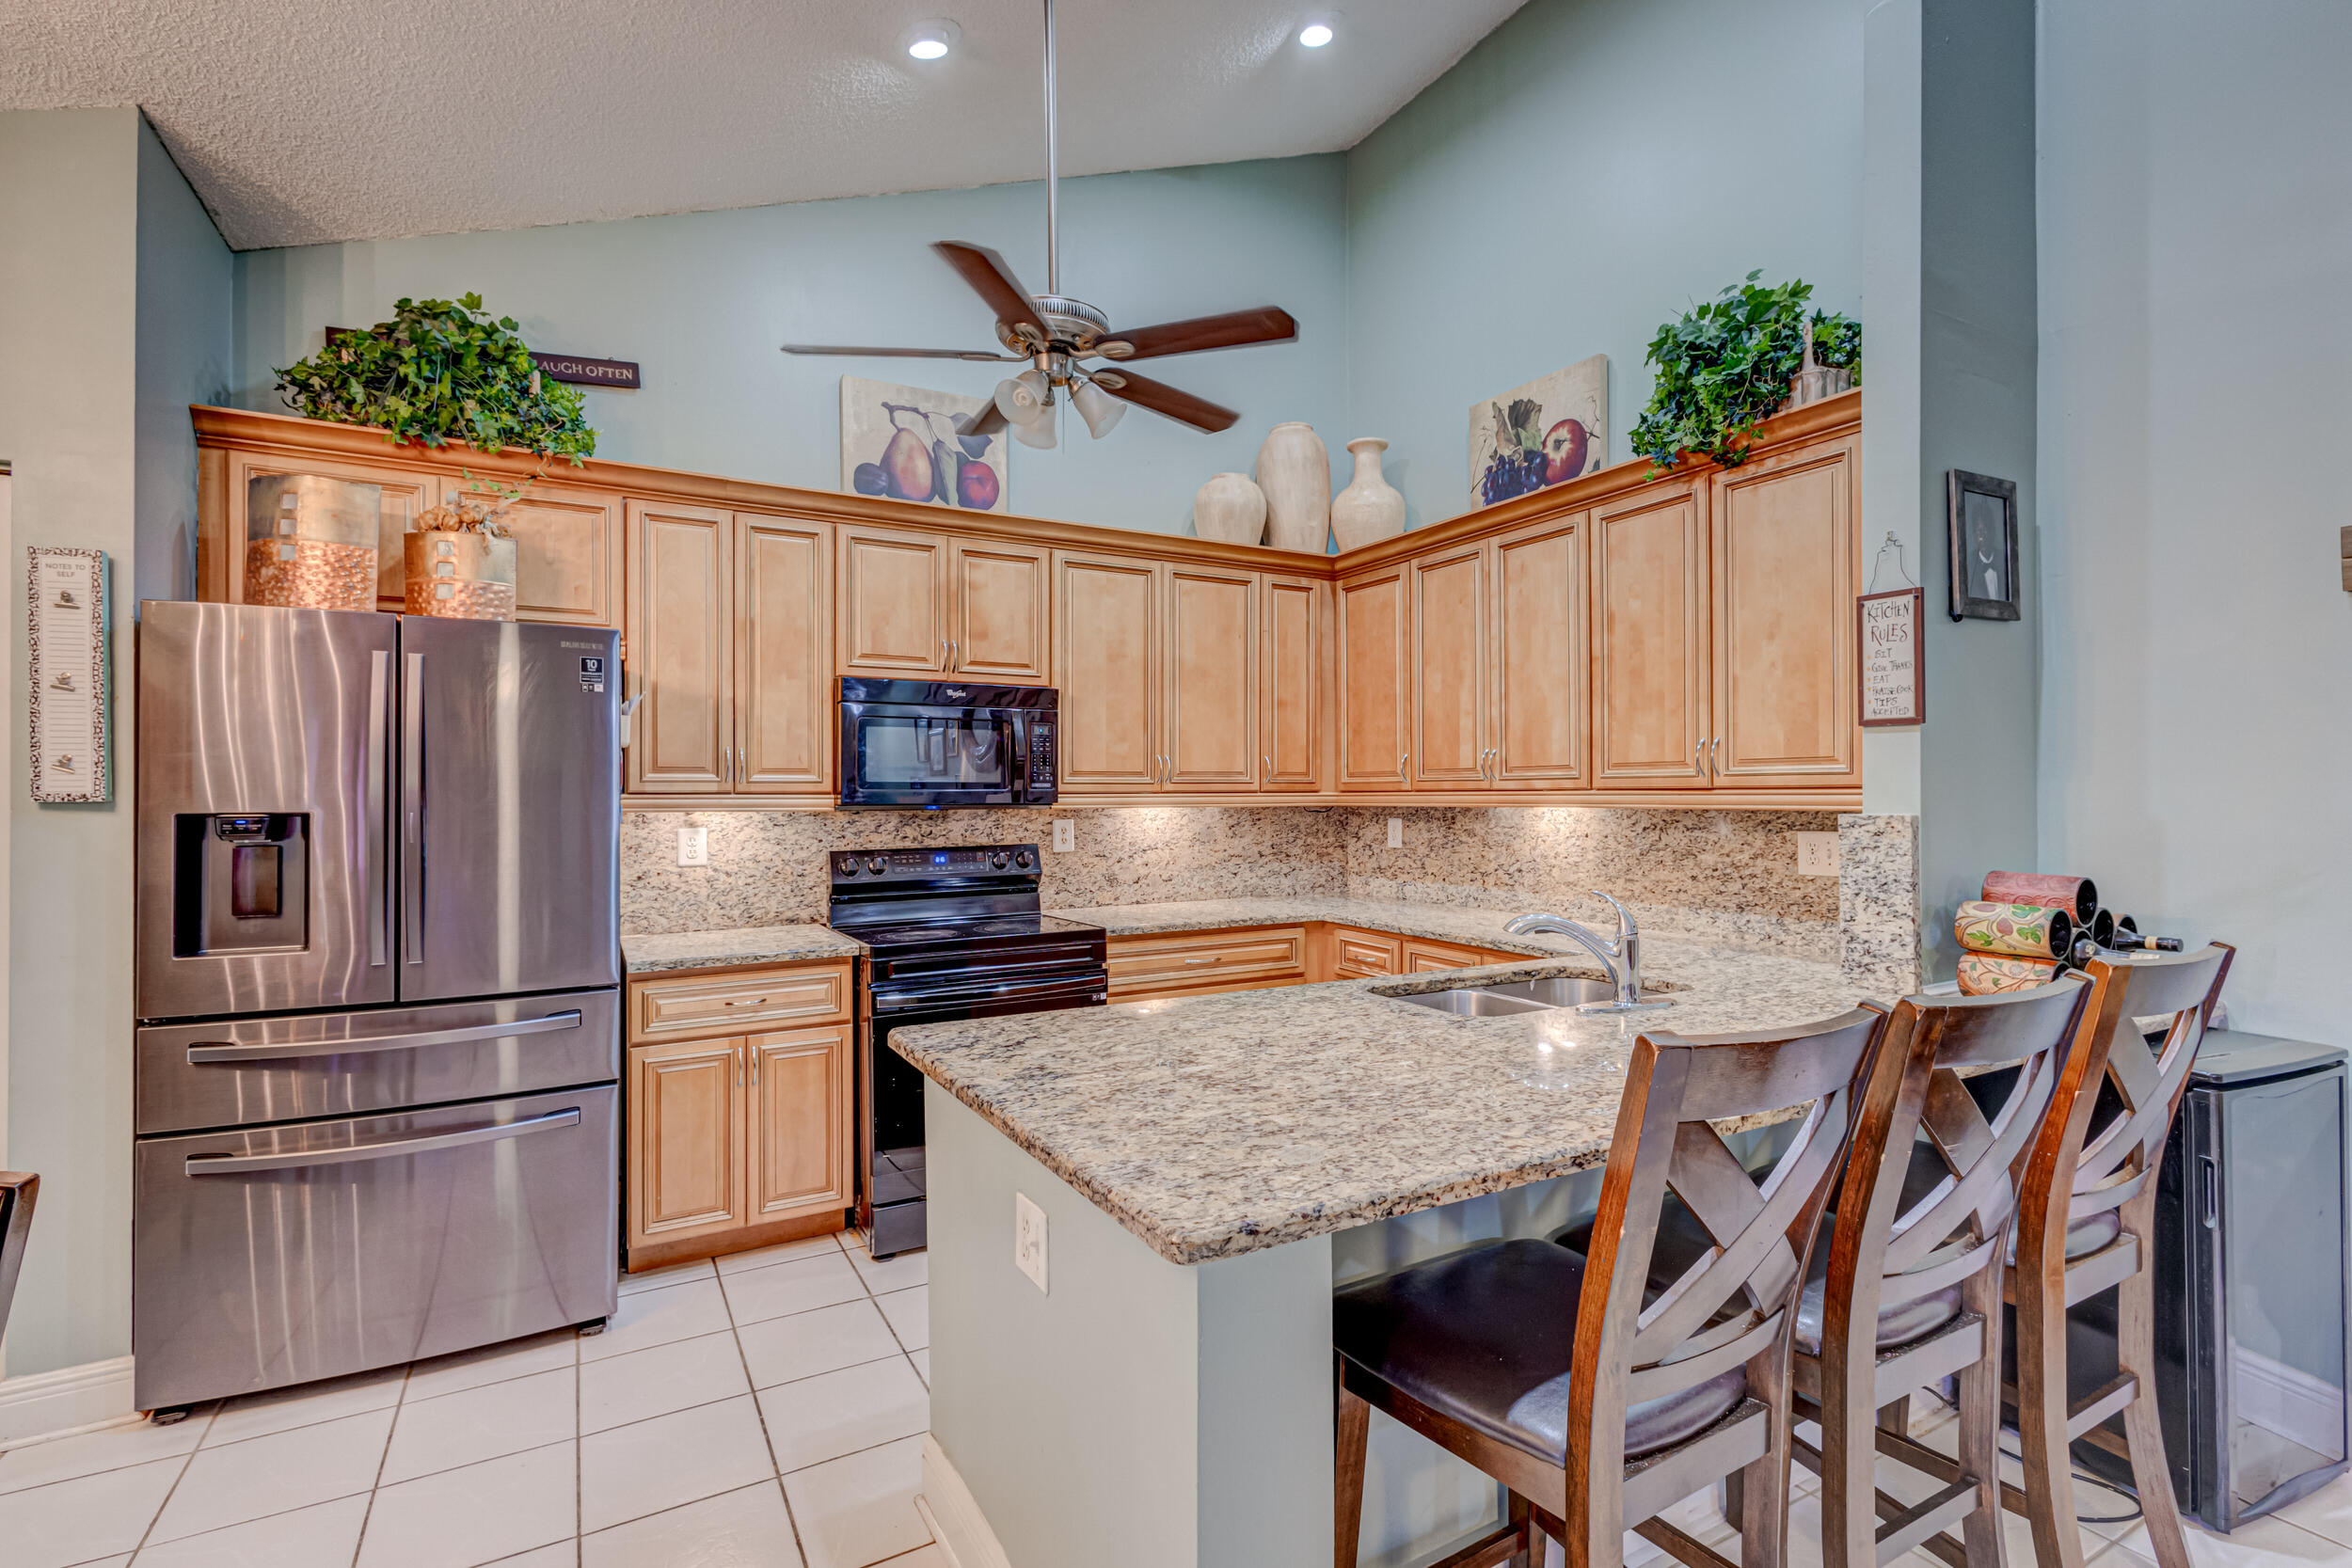 a kitchen with granite countertop a table chairs stove and refrigerator